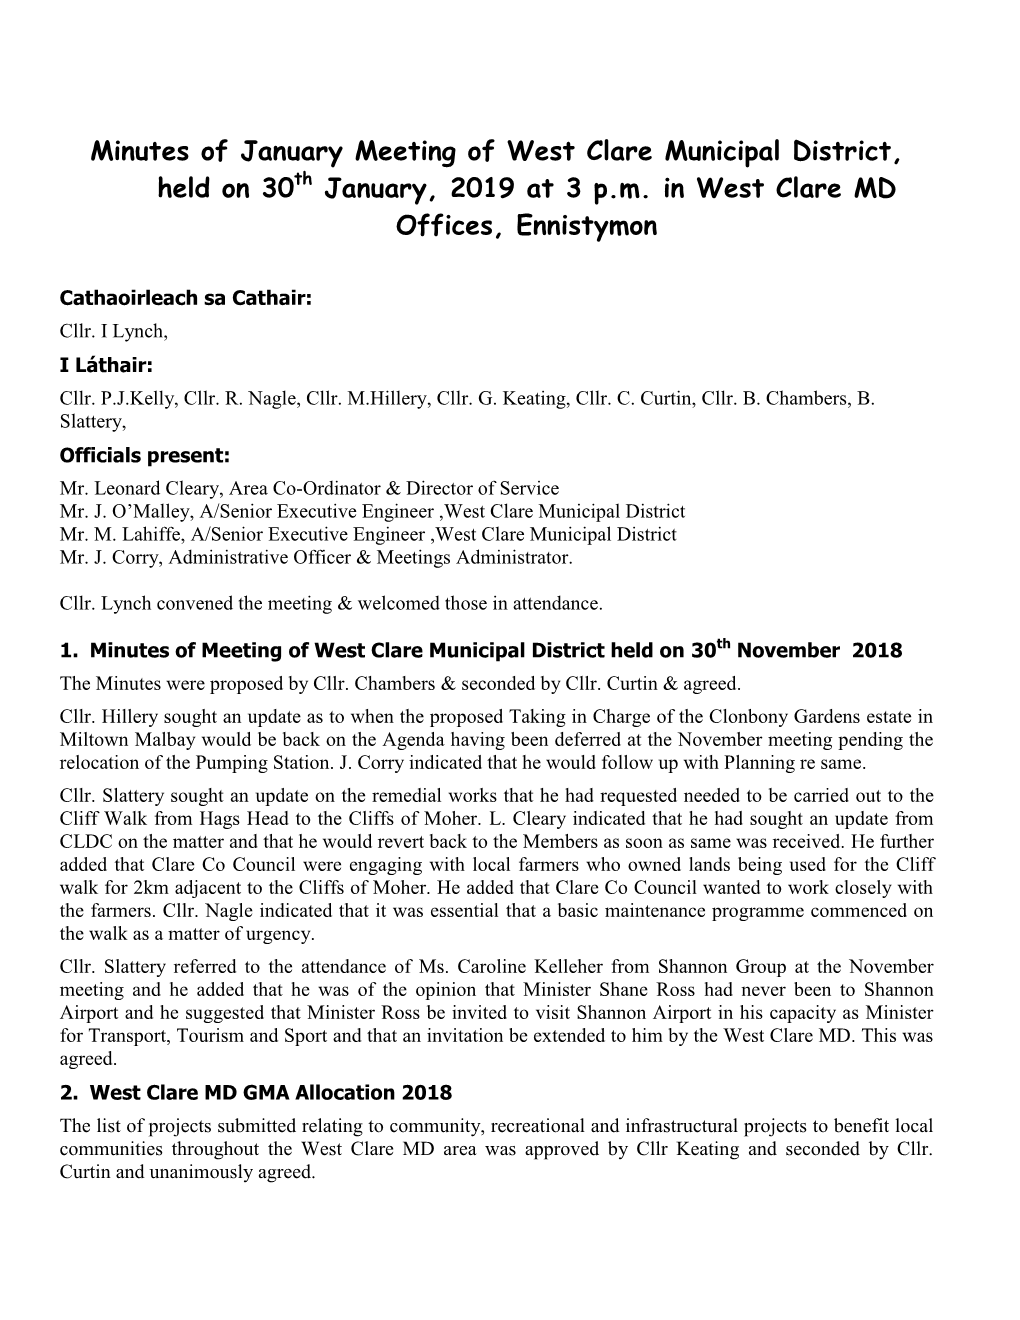 West Clare Municipal District Minutes of January 2019 Meeting